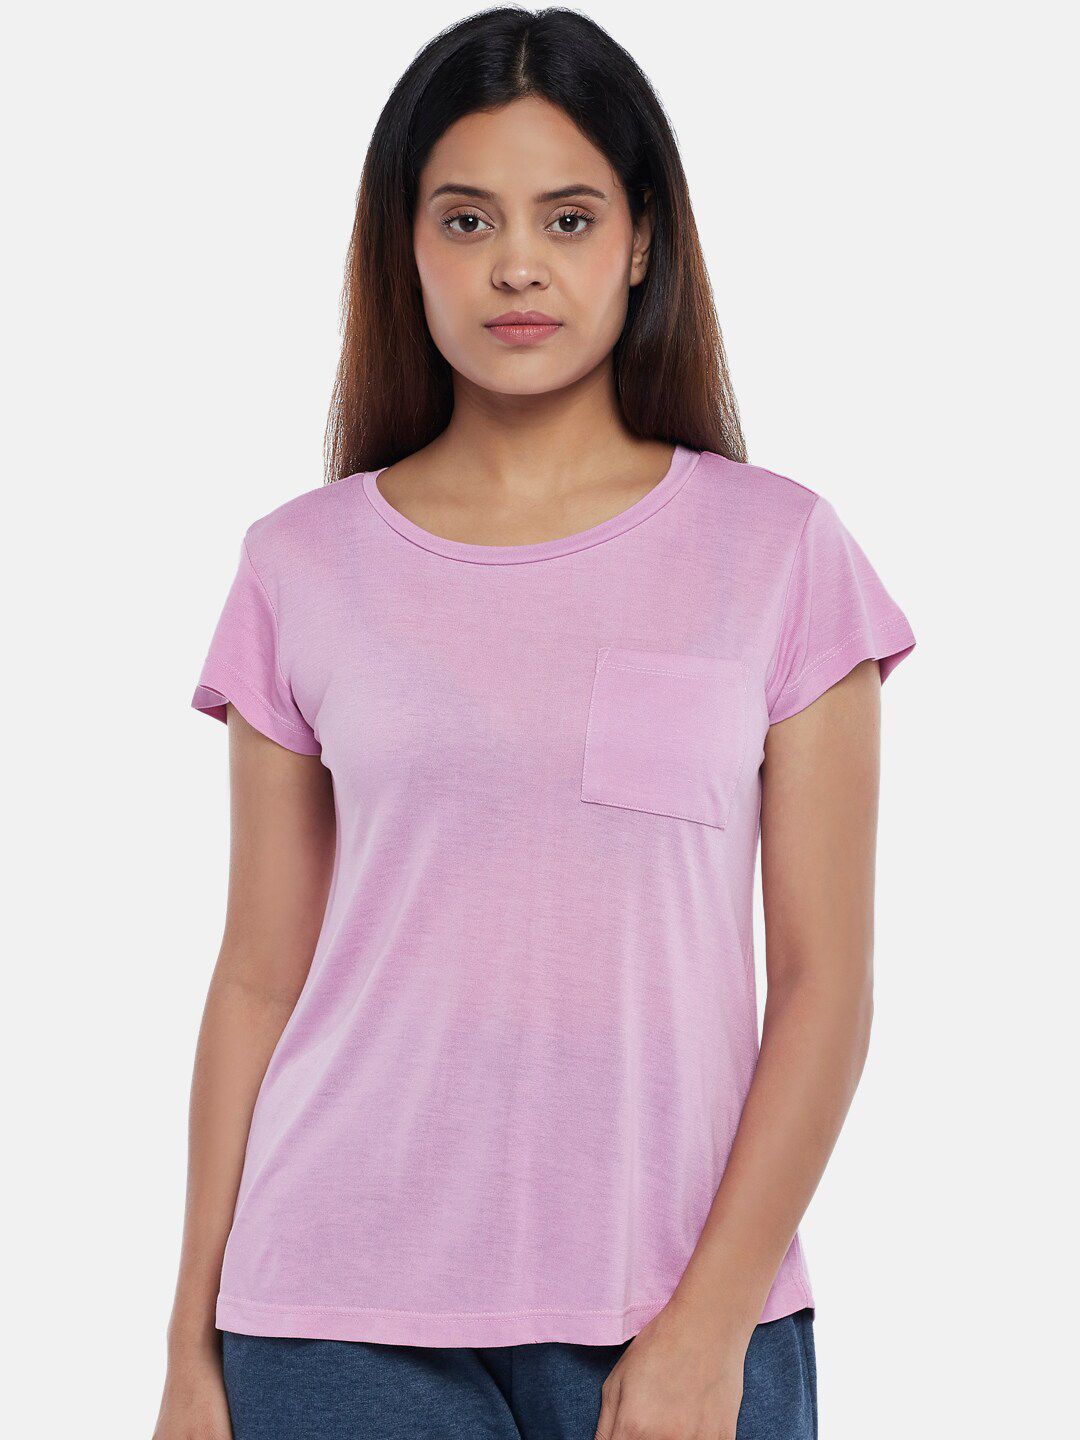 Dreamz by Pantaloons Lavender Solid Lounge T-Shirt Price in India